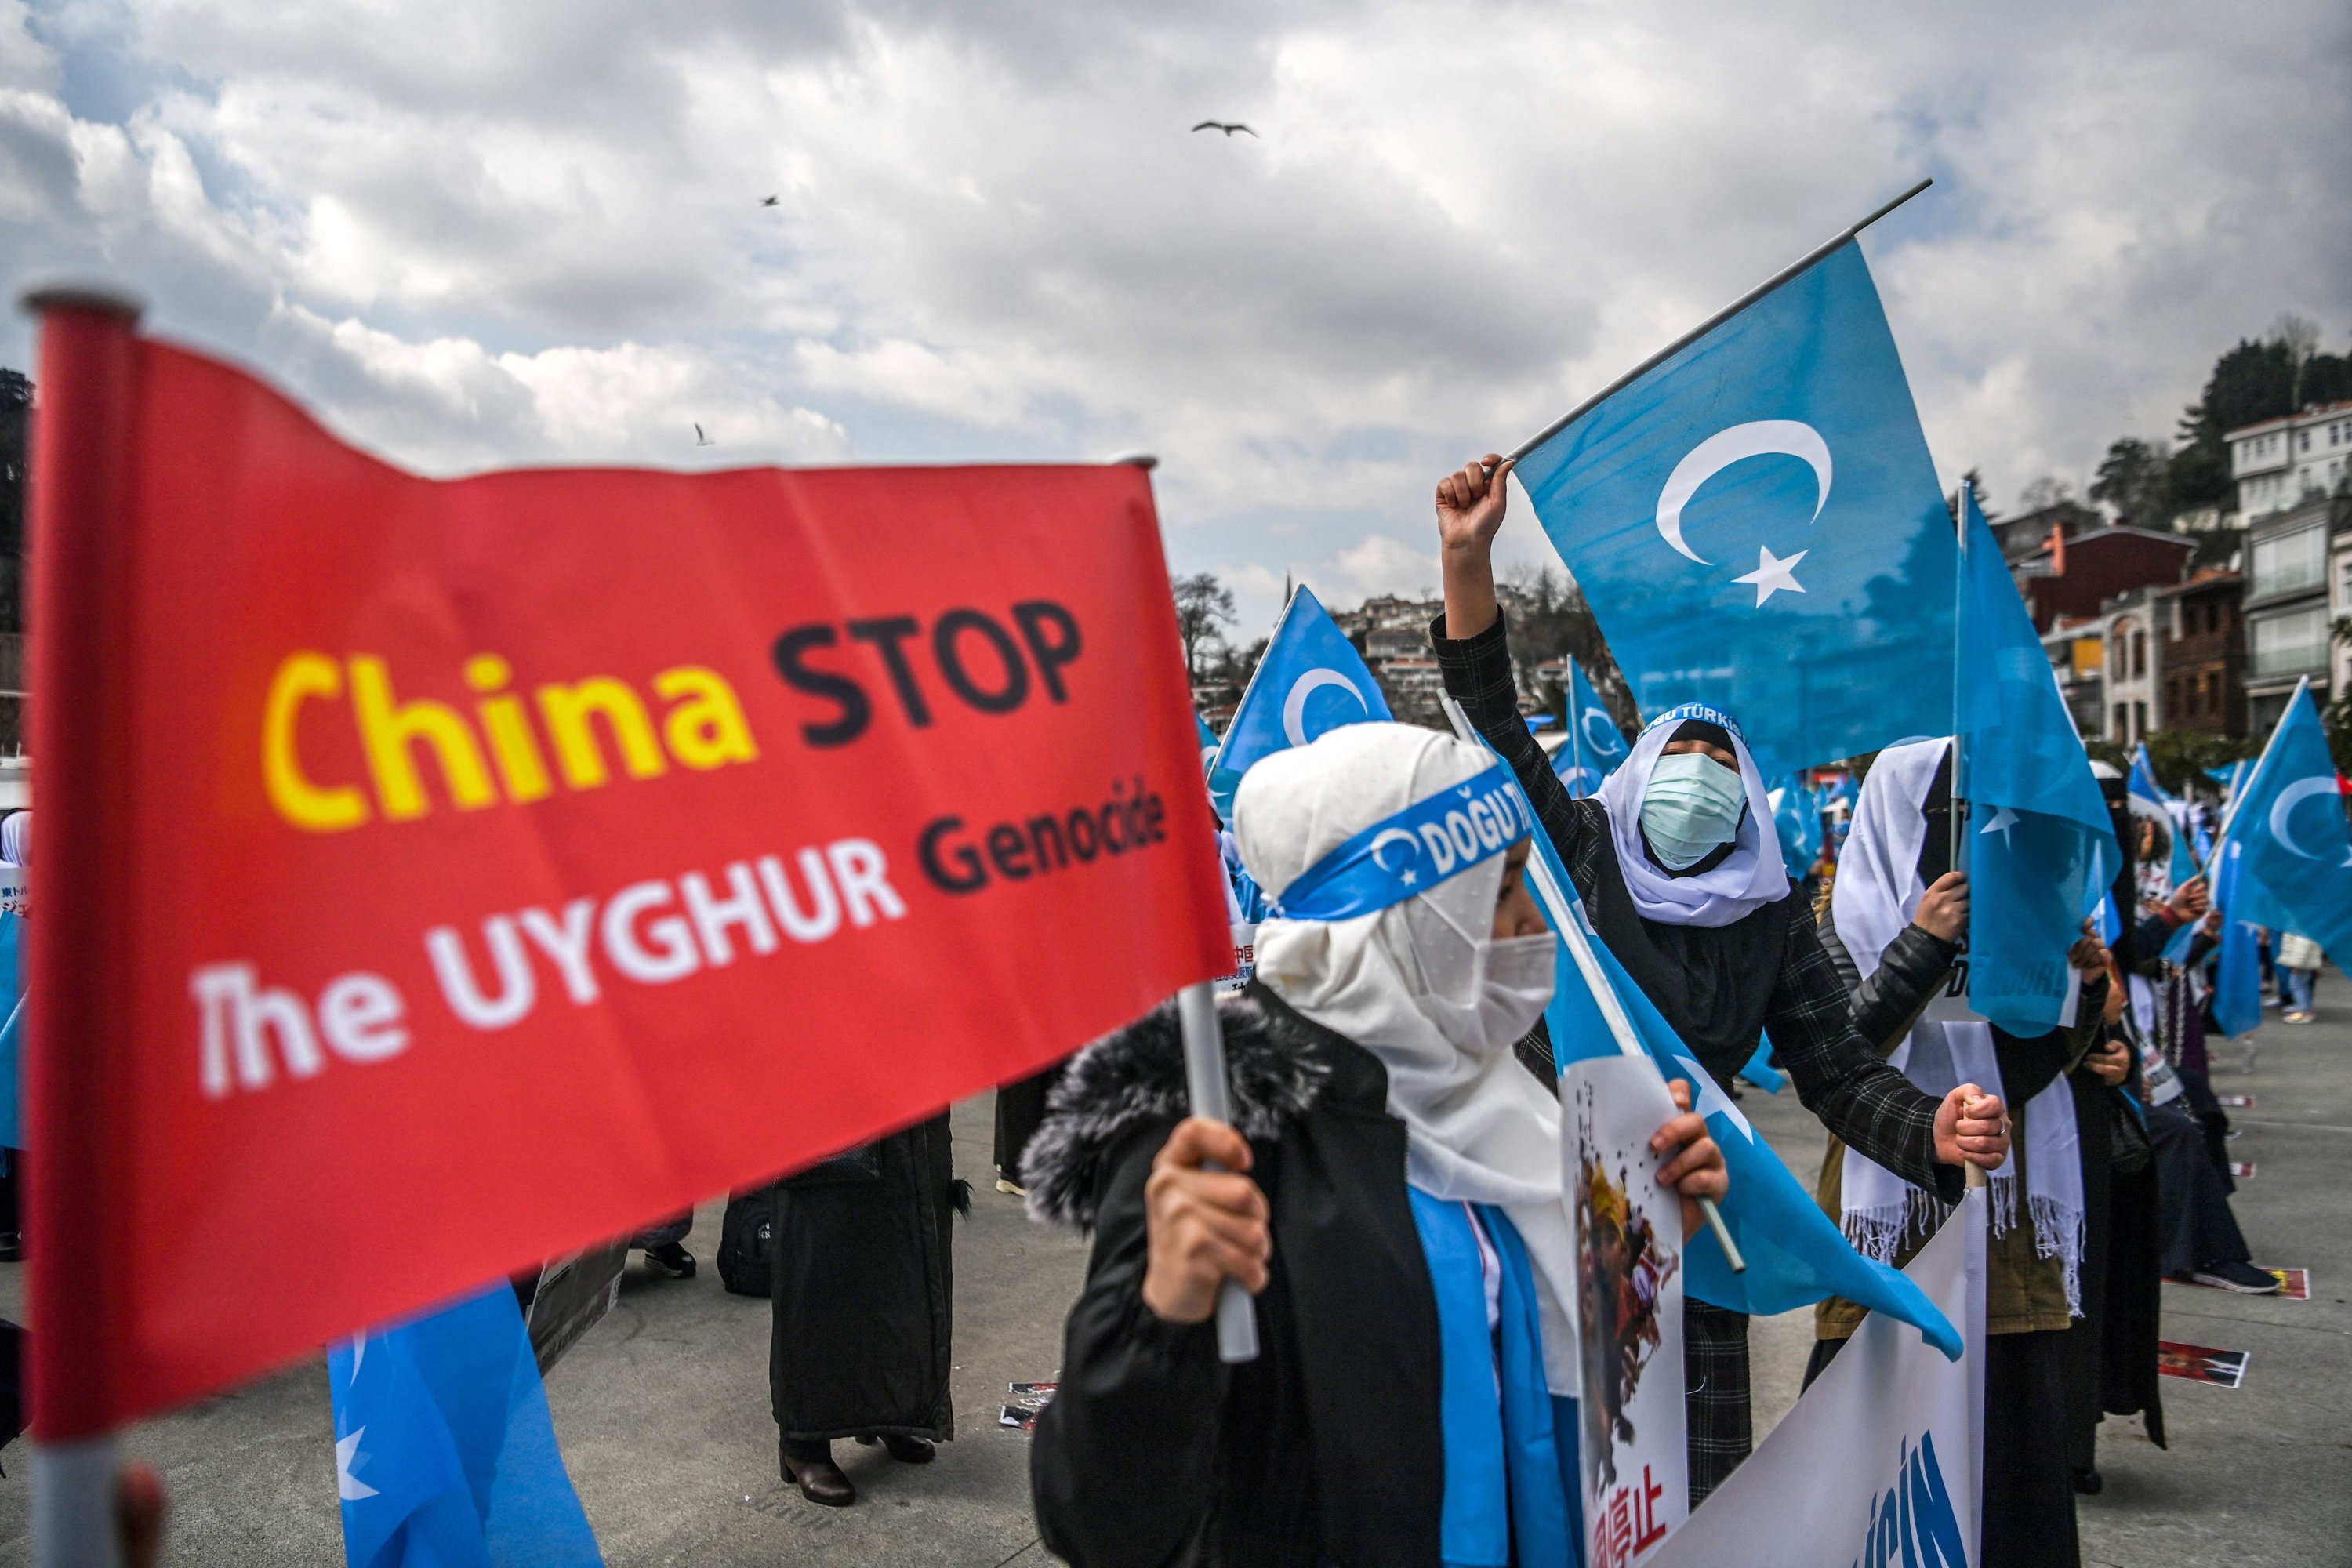 lawmakers call on uk to help end abuse of uyghurs in china | daily sabah